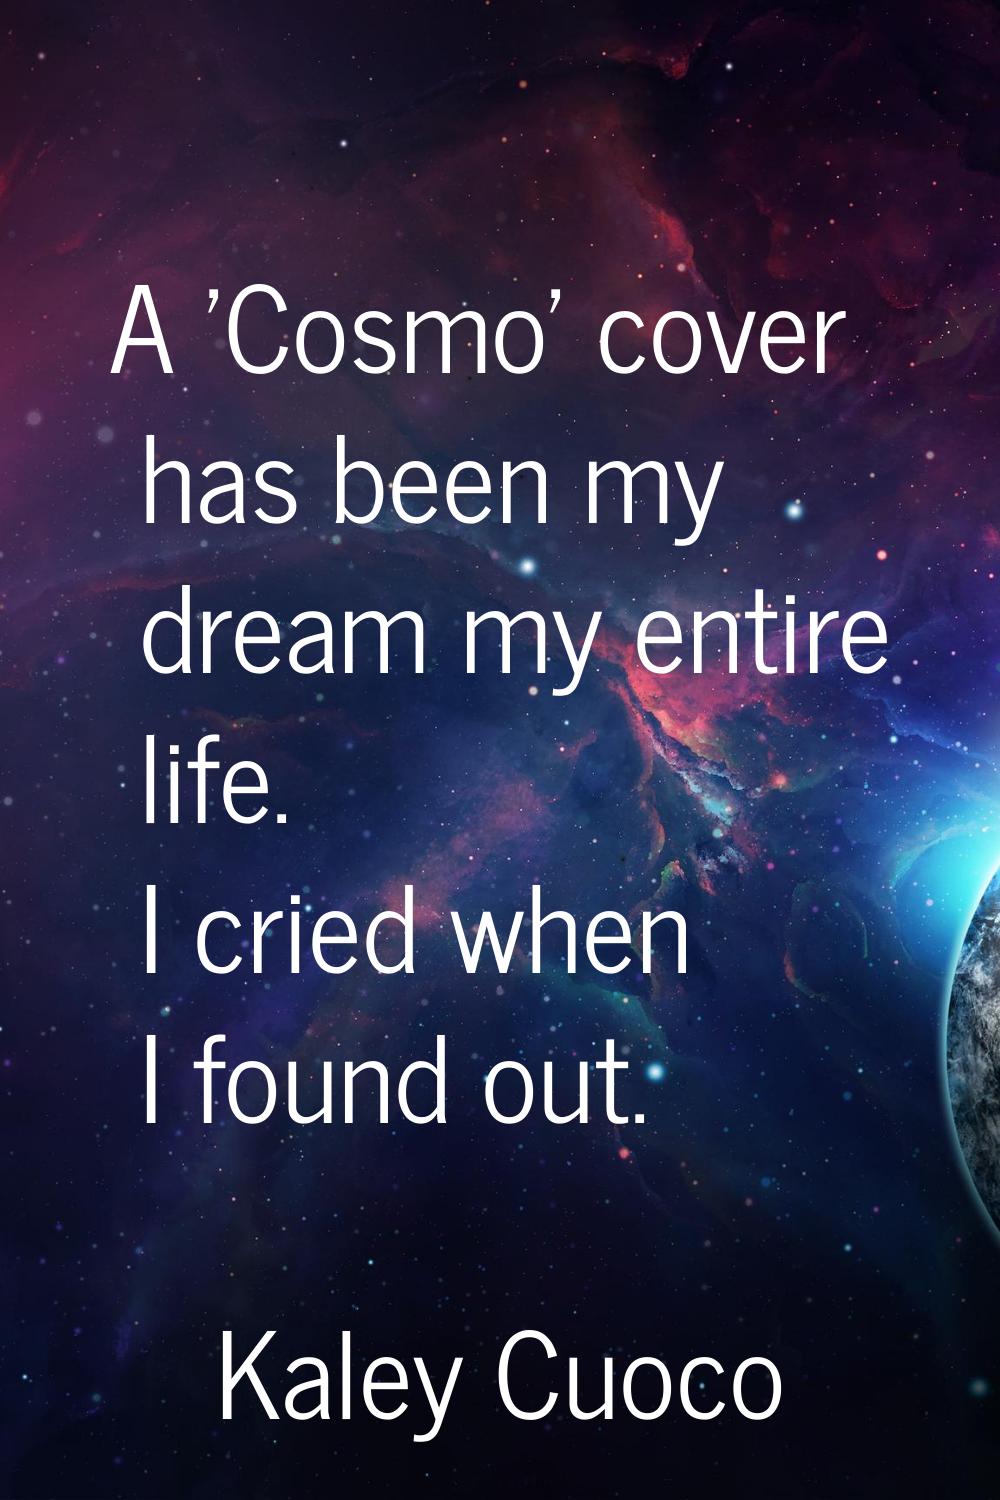 A 'Cosmo' cover has been my dream my entire life. I cried when I found out.